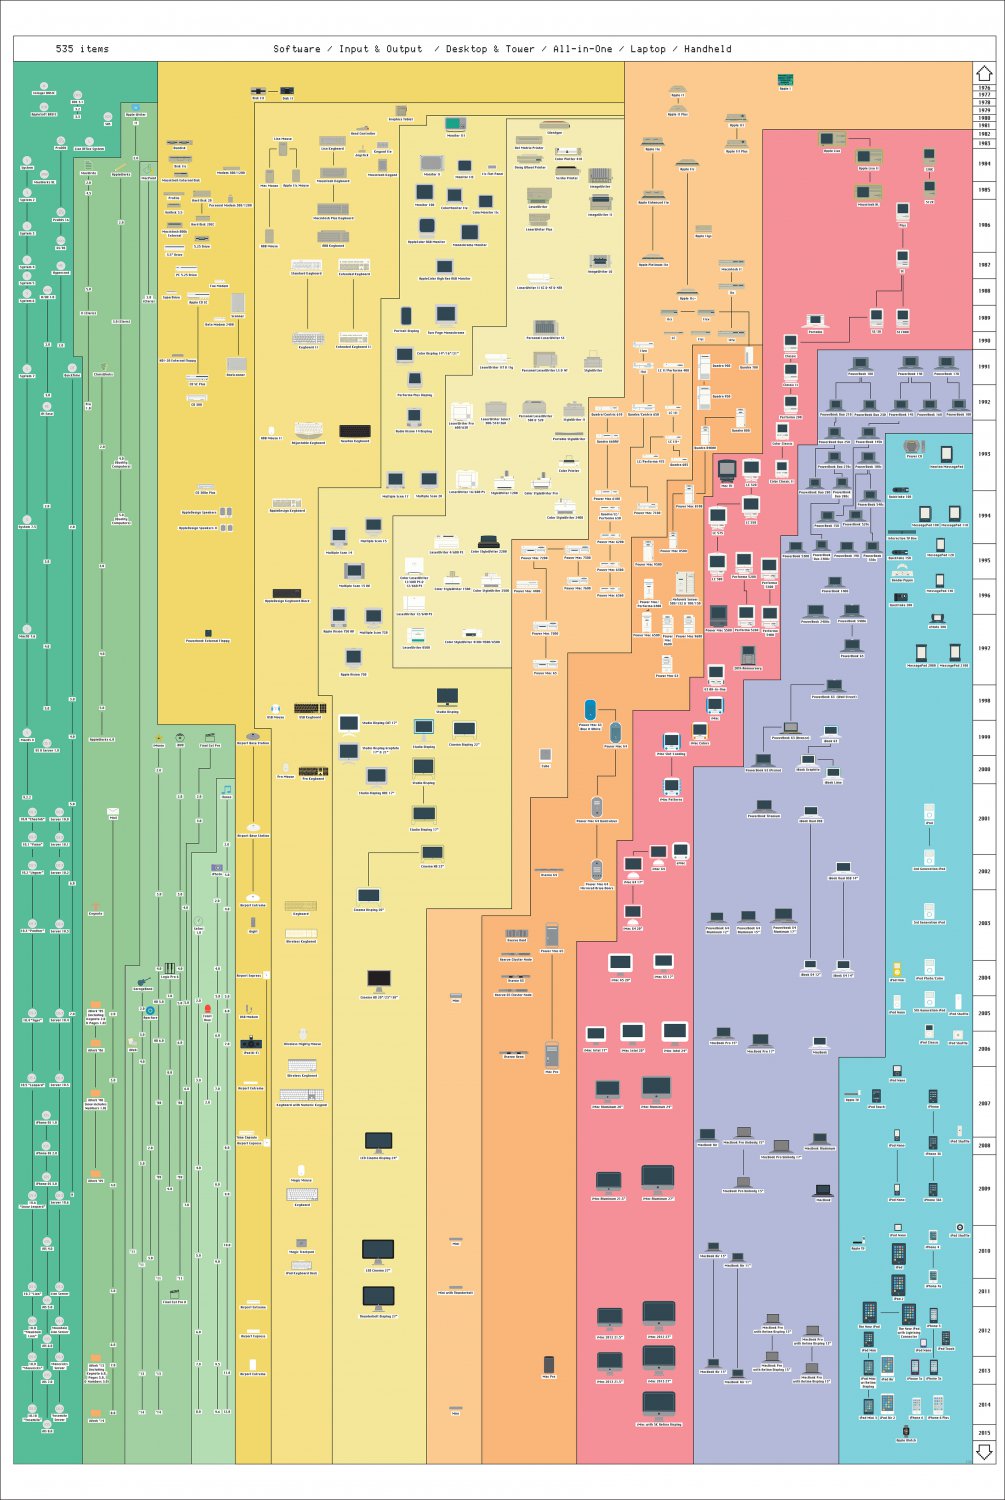 The Great History of Apple Chart 18"x28" (45cm/70cm) Canvas Print